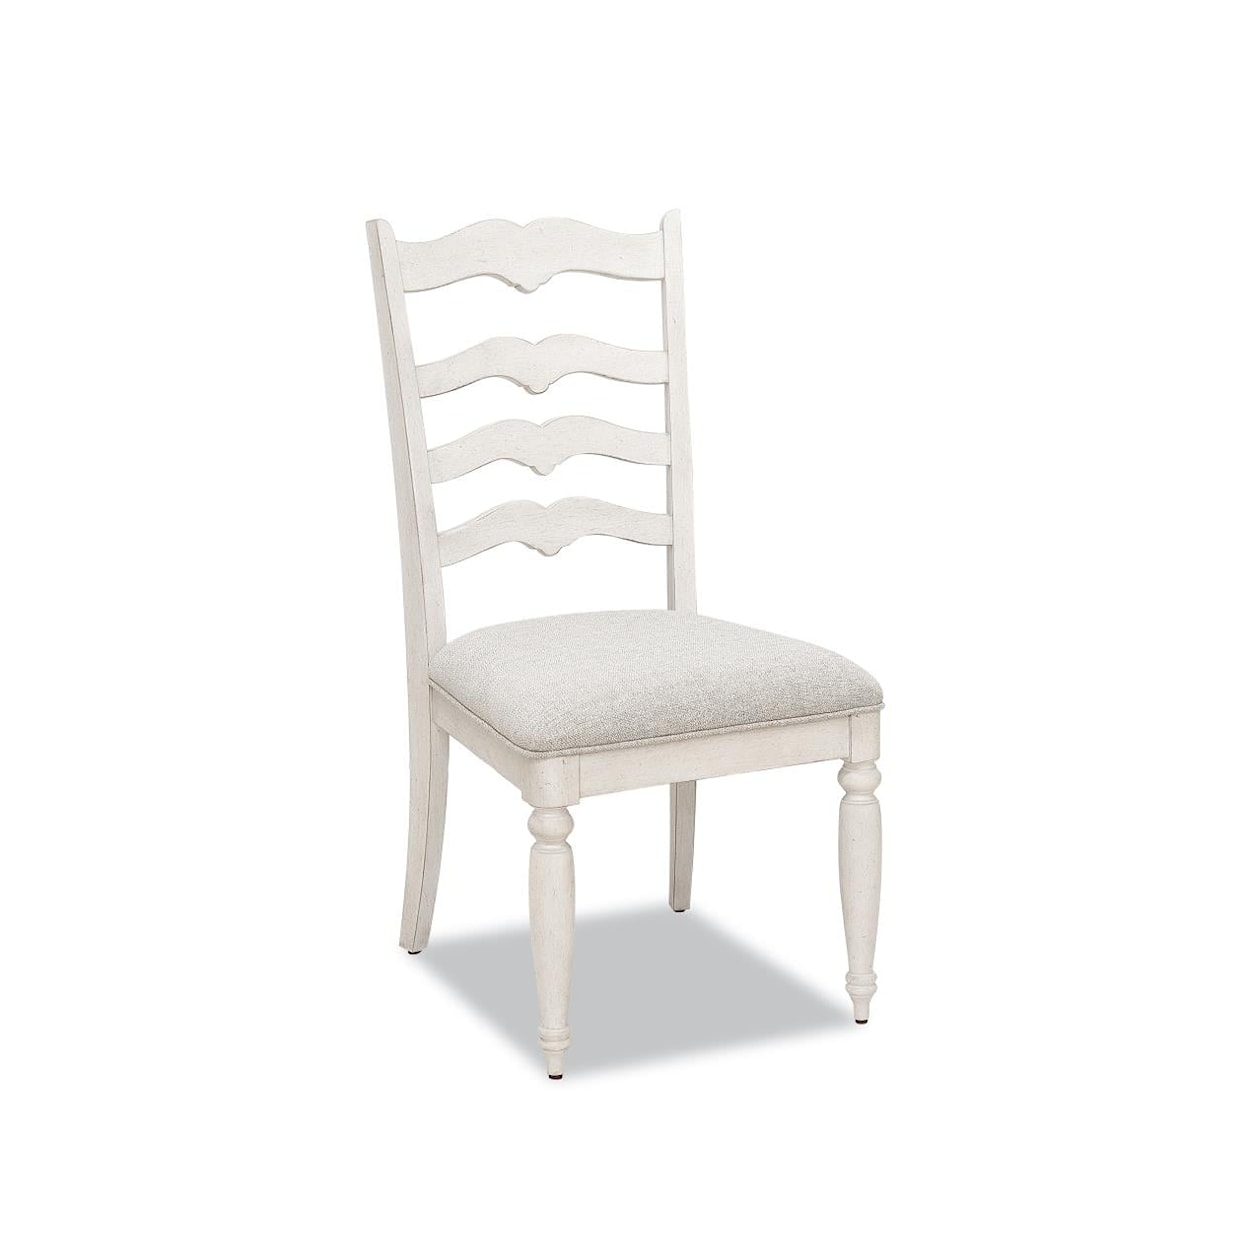 Trisha Yearwood Home Collection by Legacy Classic Nashville Ladderback Side Chair